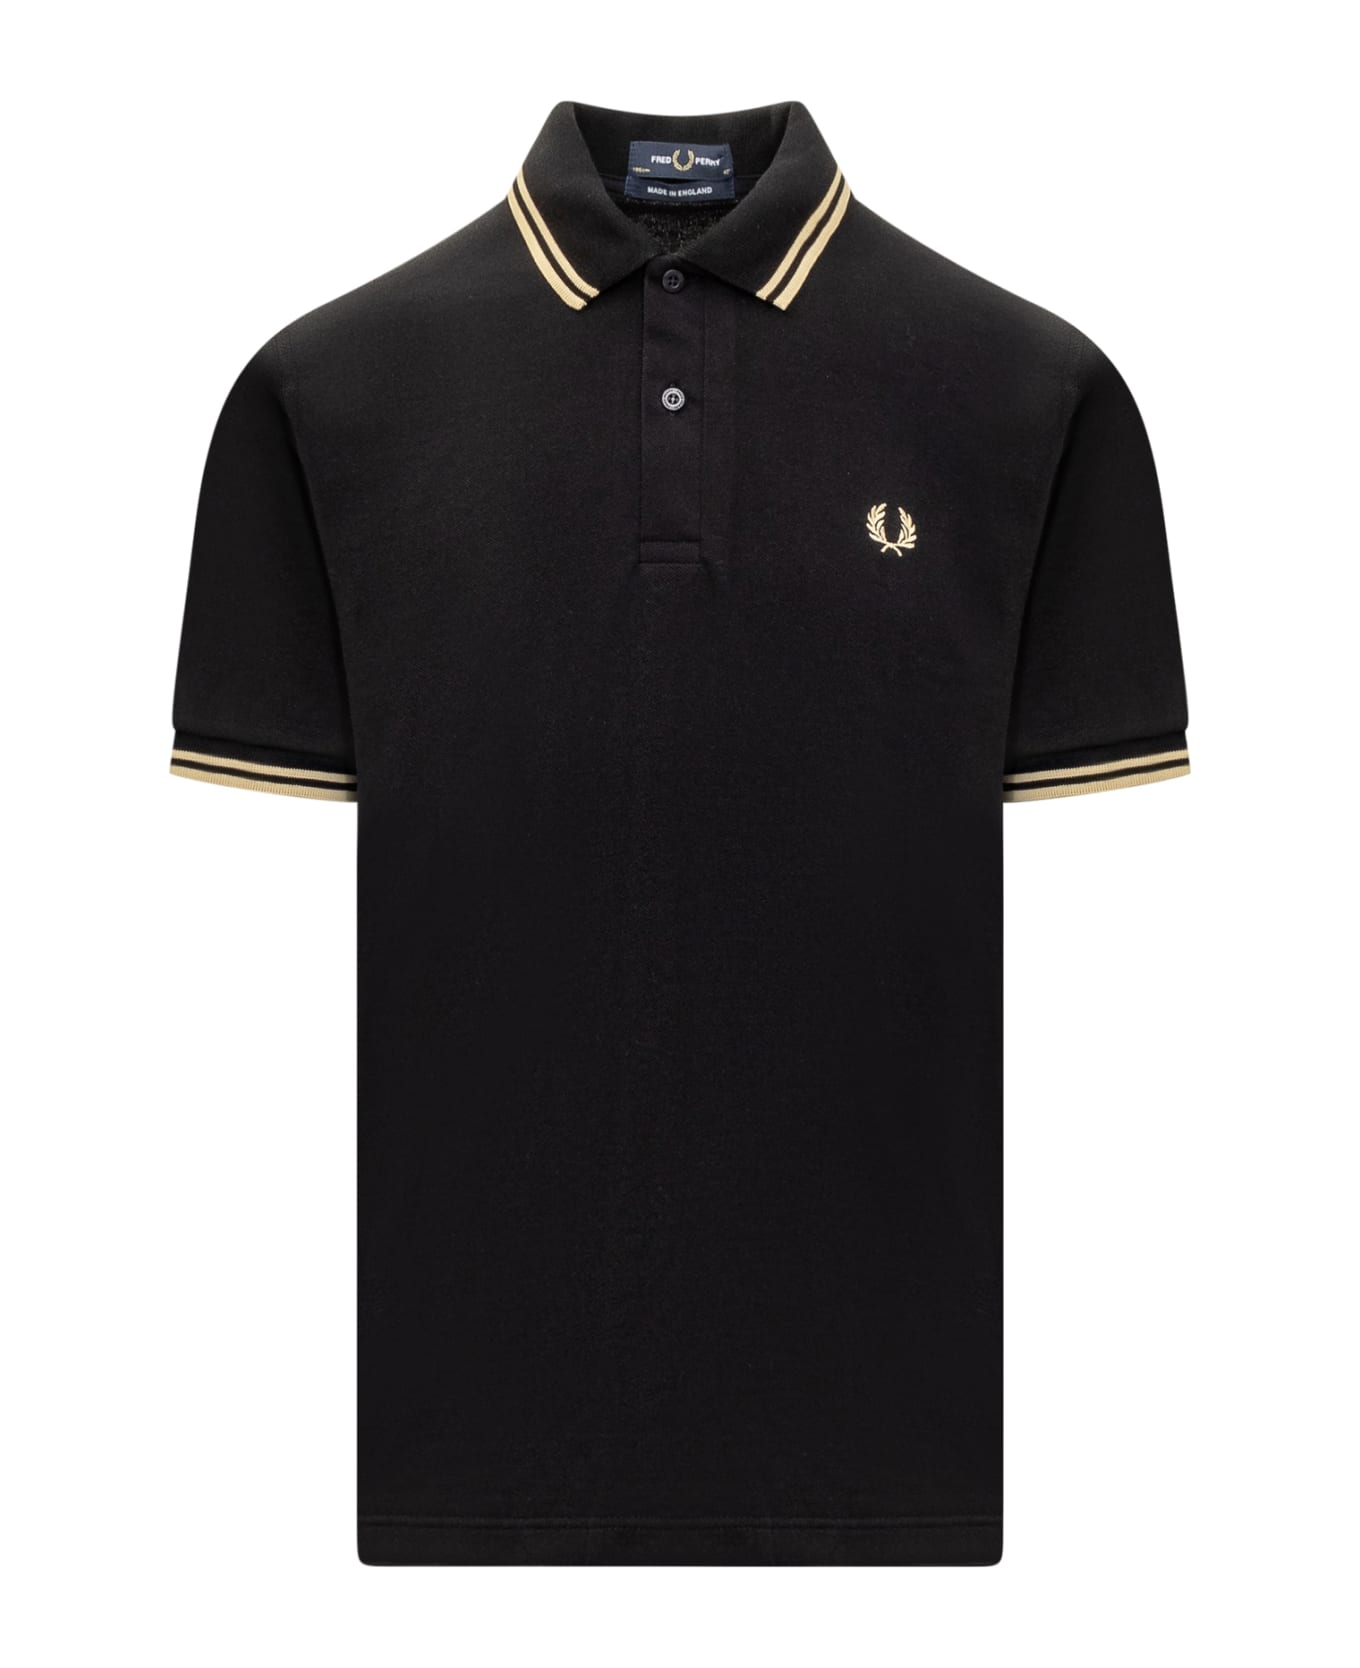 Fred Perry Polo Shirt - BLACK/CHAMPAGNE ポロシャツ